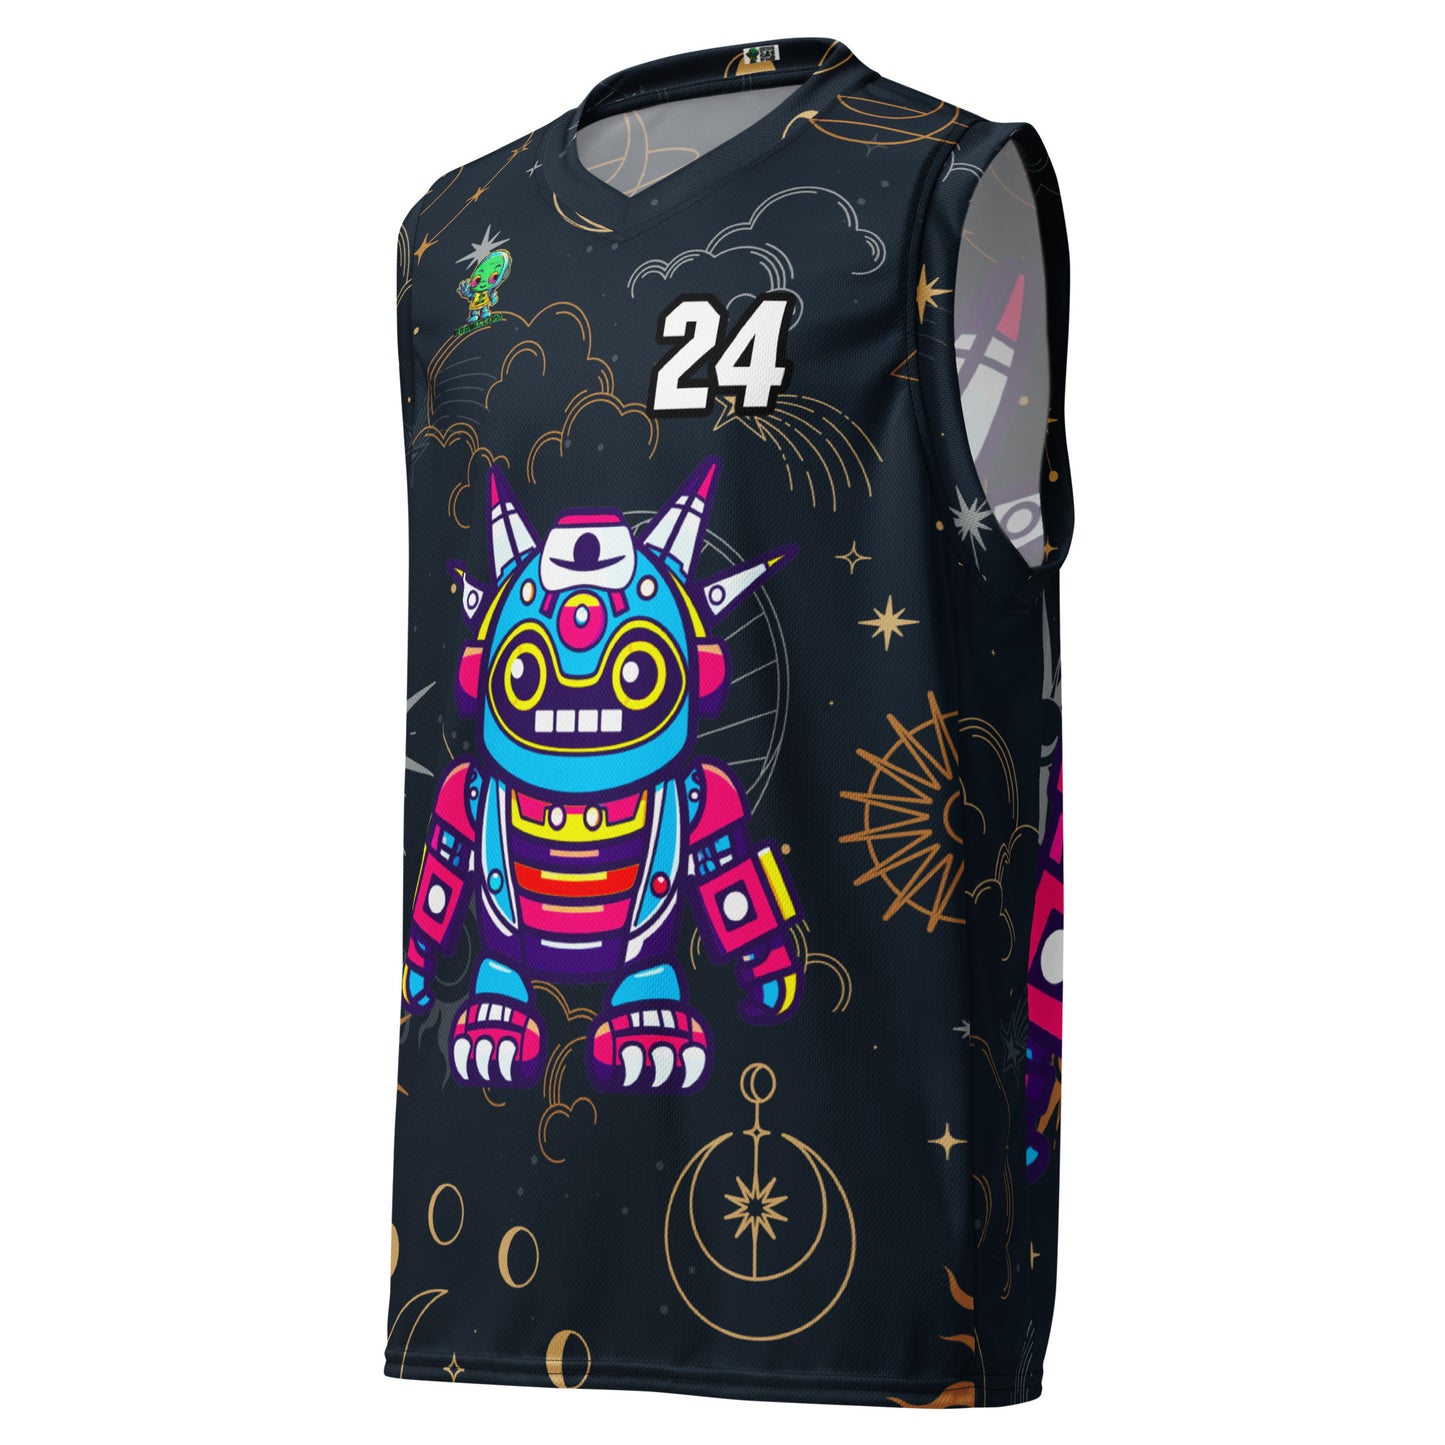 Techno Guardian - Recycled unisex basketball jersey - Starry Odyssey Colorway